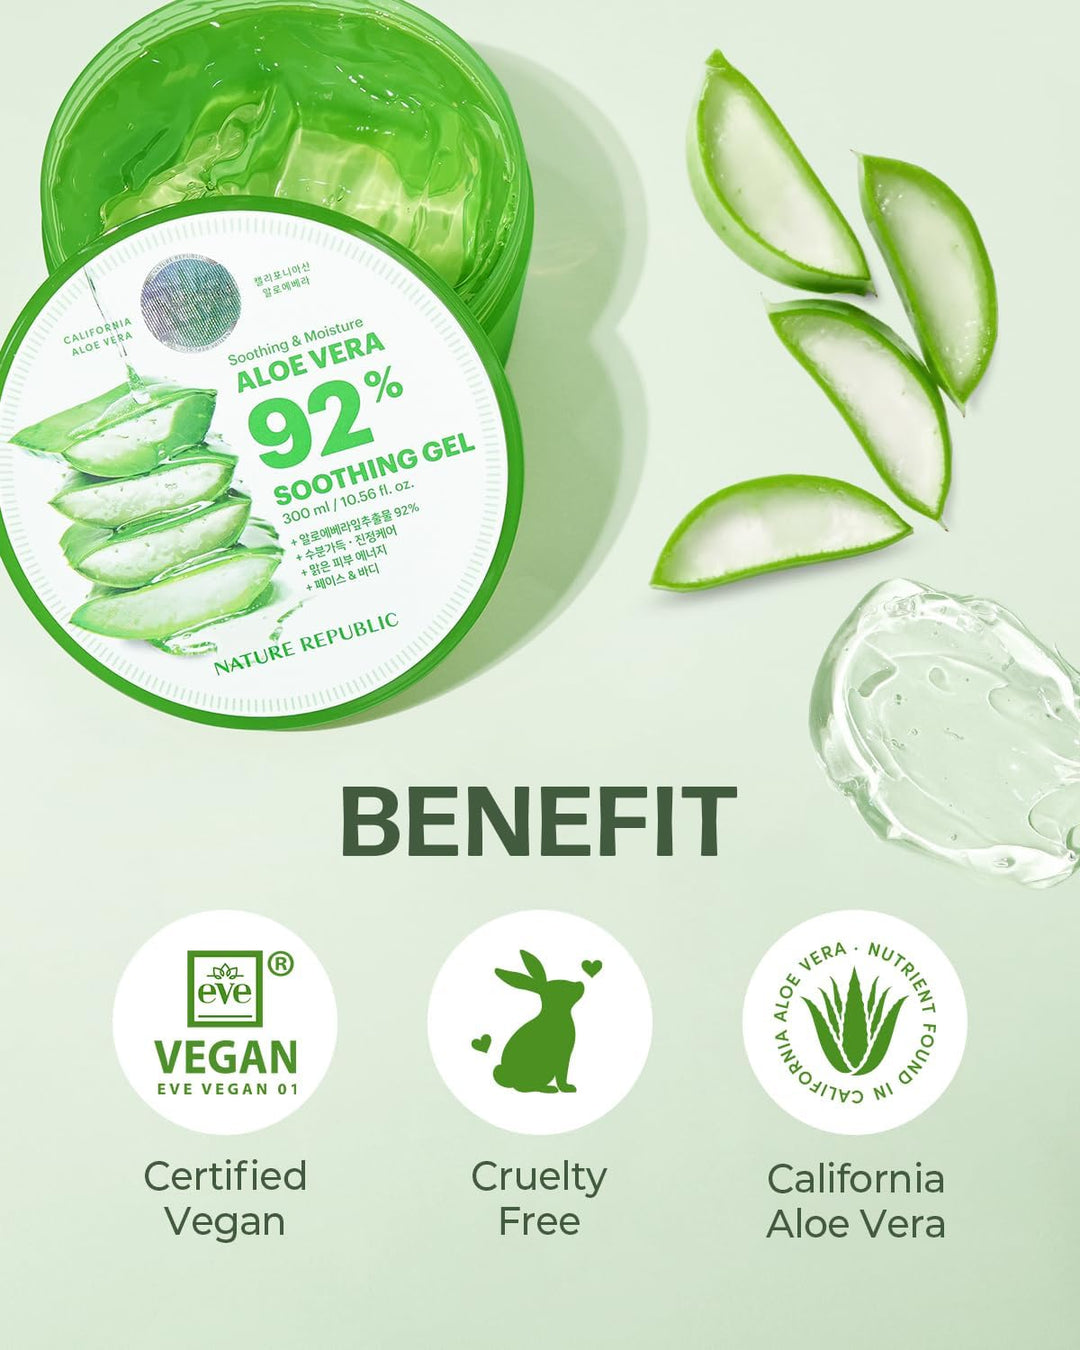 NATURE REPUBLIC Aloe Vera 92-Percent Soothing Gel 300ml (NEW PACKAGE)Health & Beauty